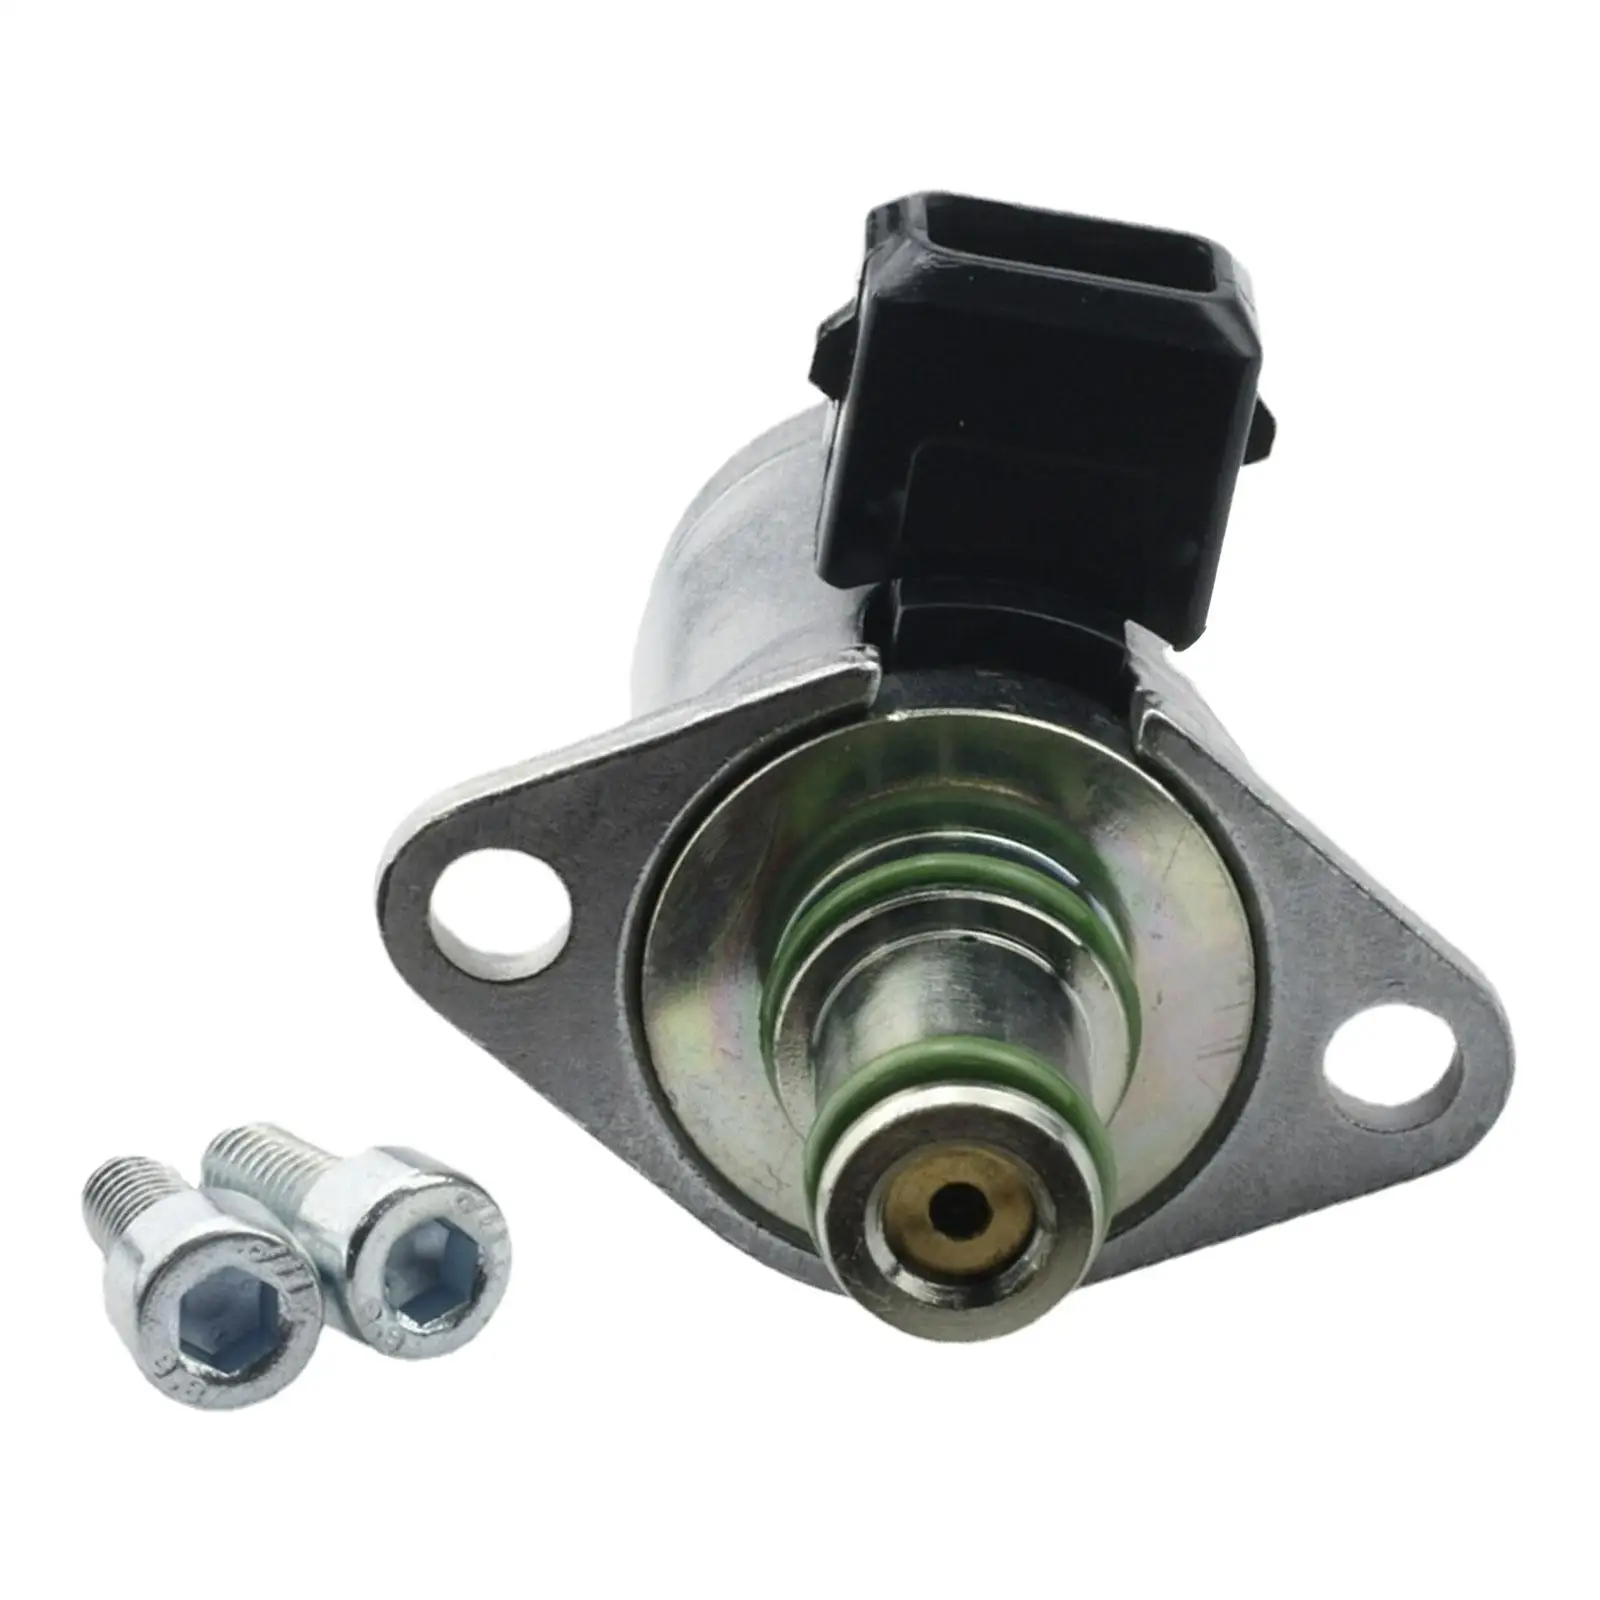 Power Speed Related Steering Proportioning Valve Spare Parts Replaces A2114600984 2114600884 for Mercedes-benz C-klass